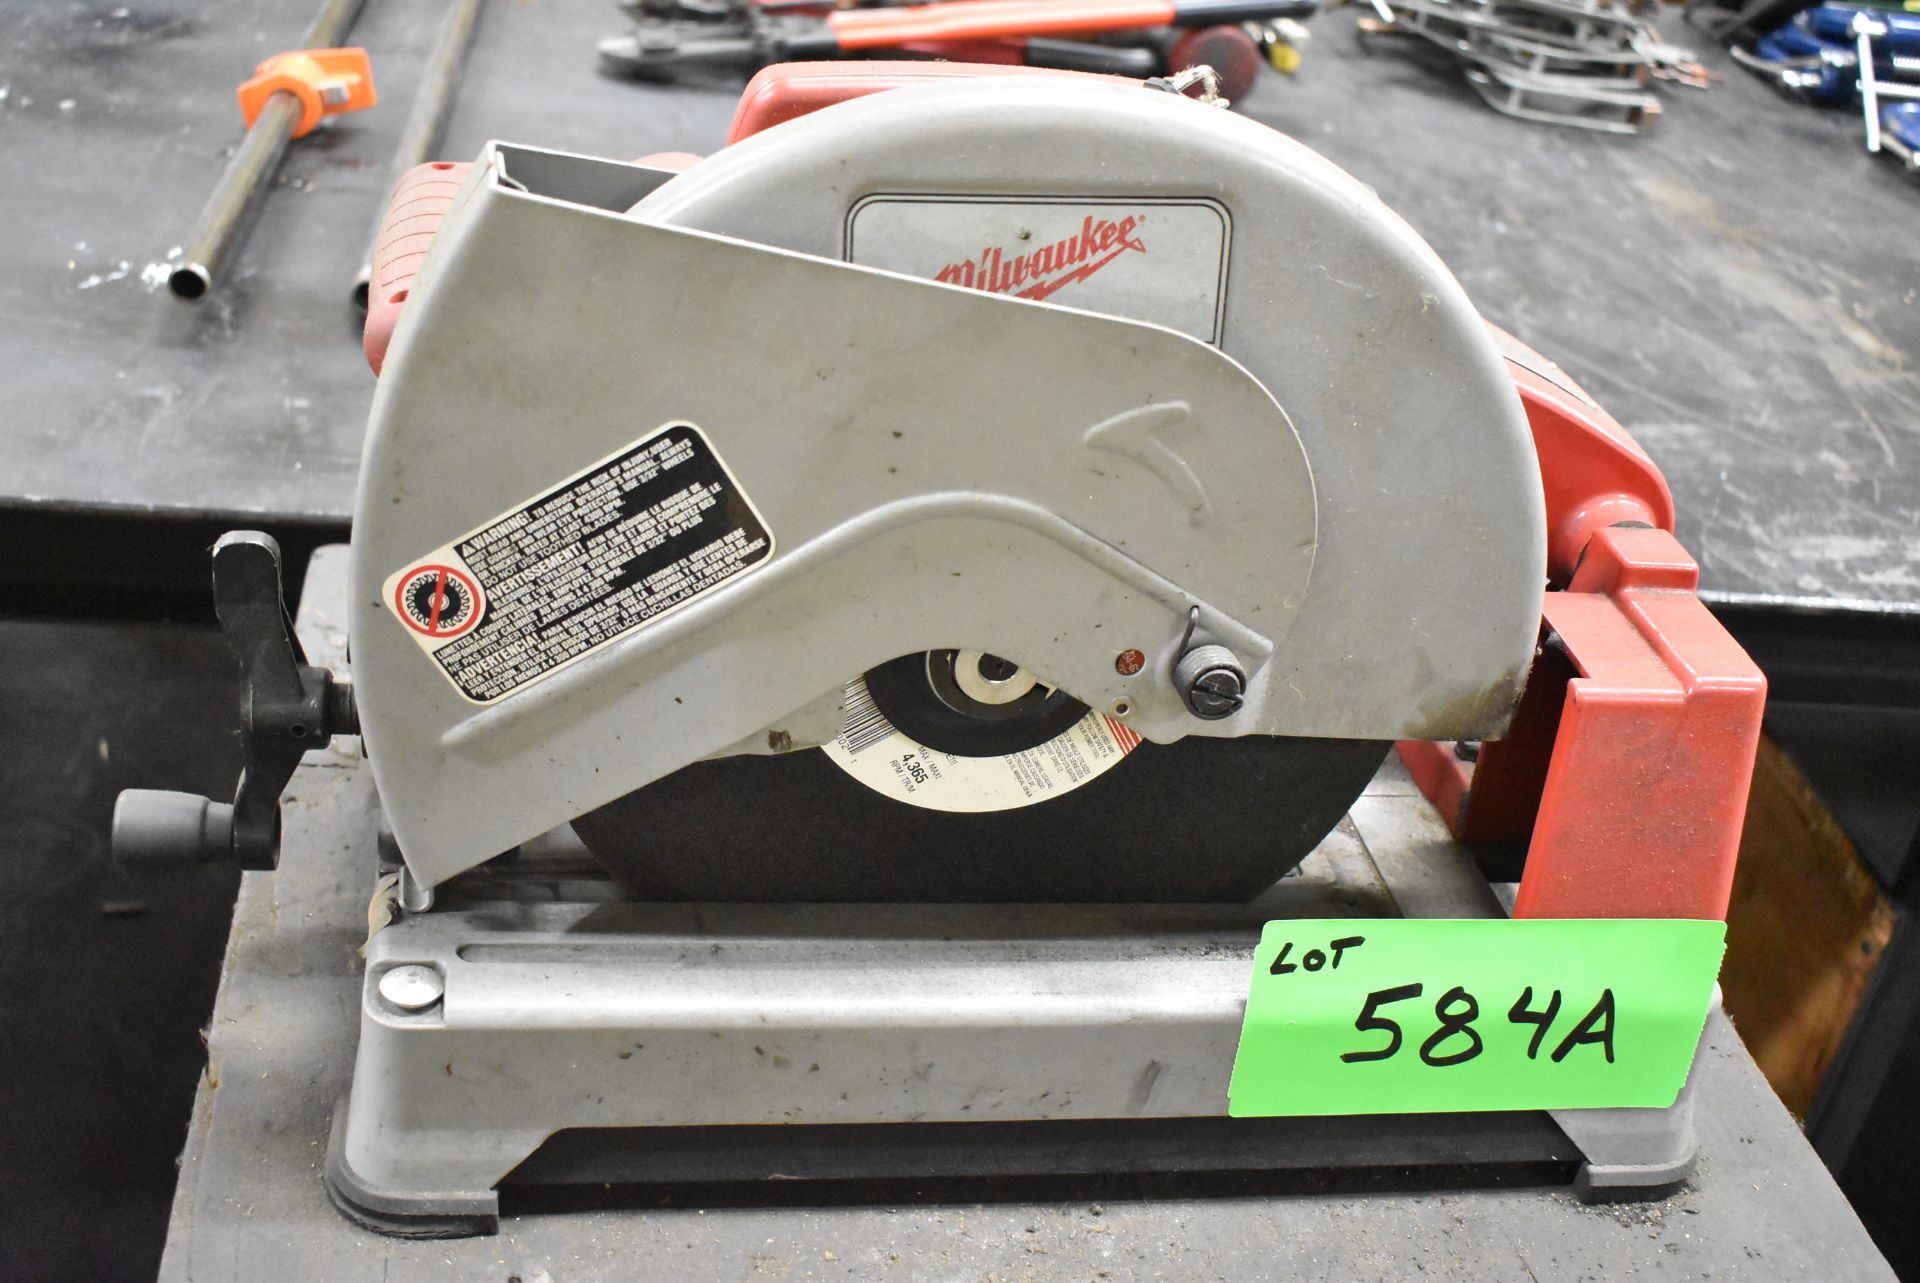 MILWAUKEE 14" ABRASIVE CUT OFF SAW WITH CART - Image 2 of 4